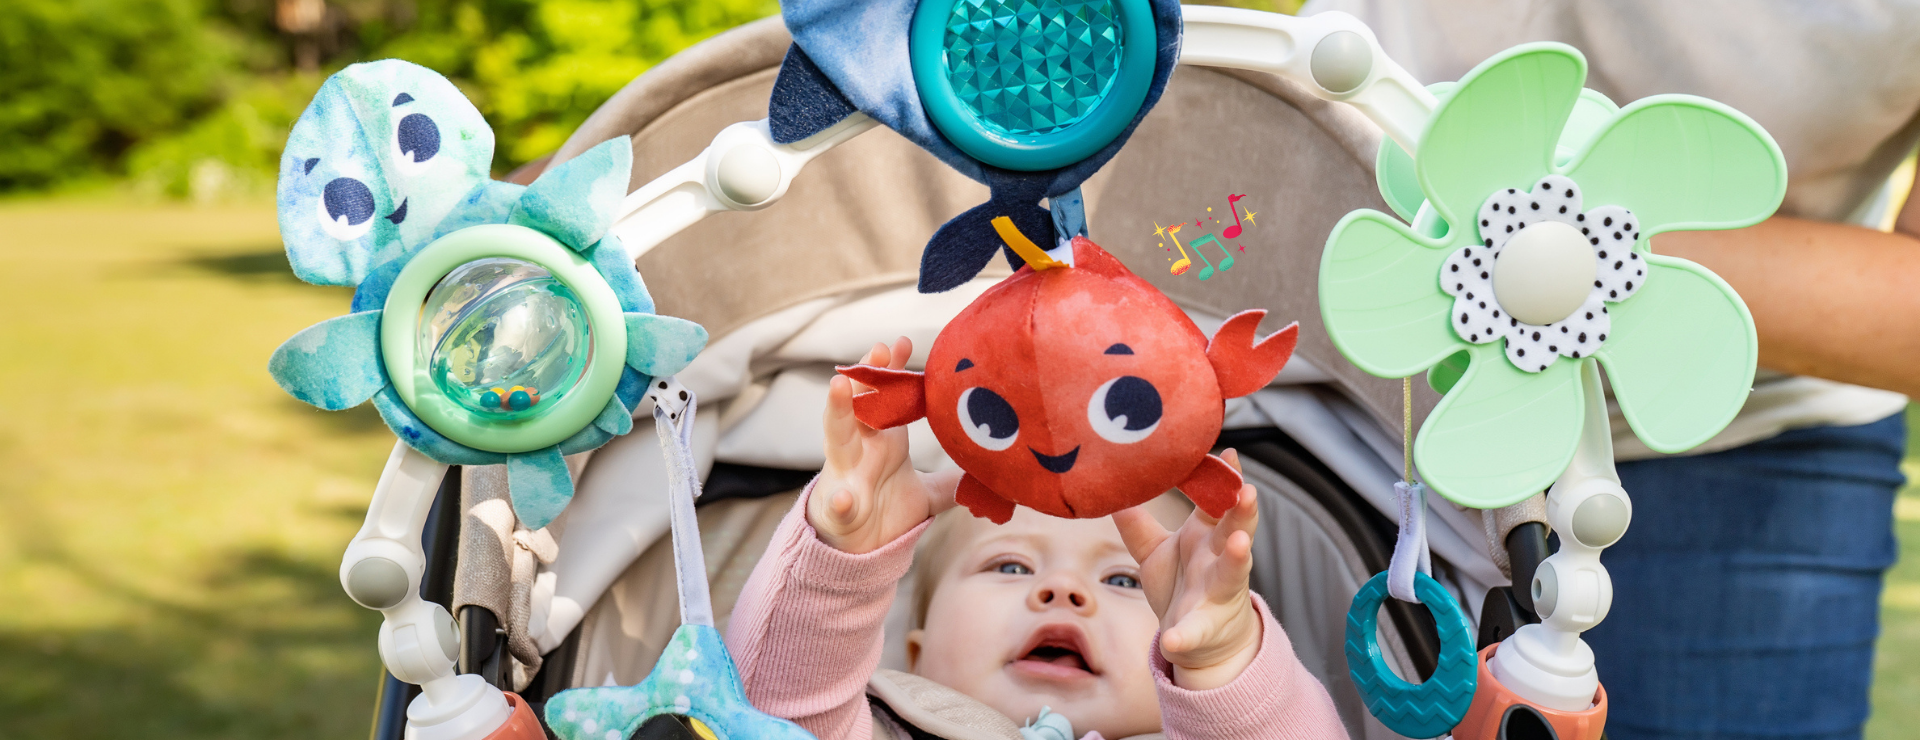 Baby-activated musical crab toy teaches little ones the basics of cause and effect